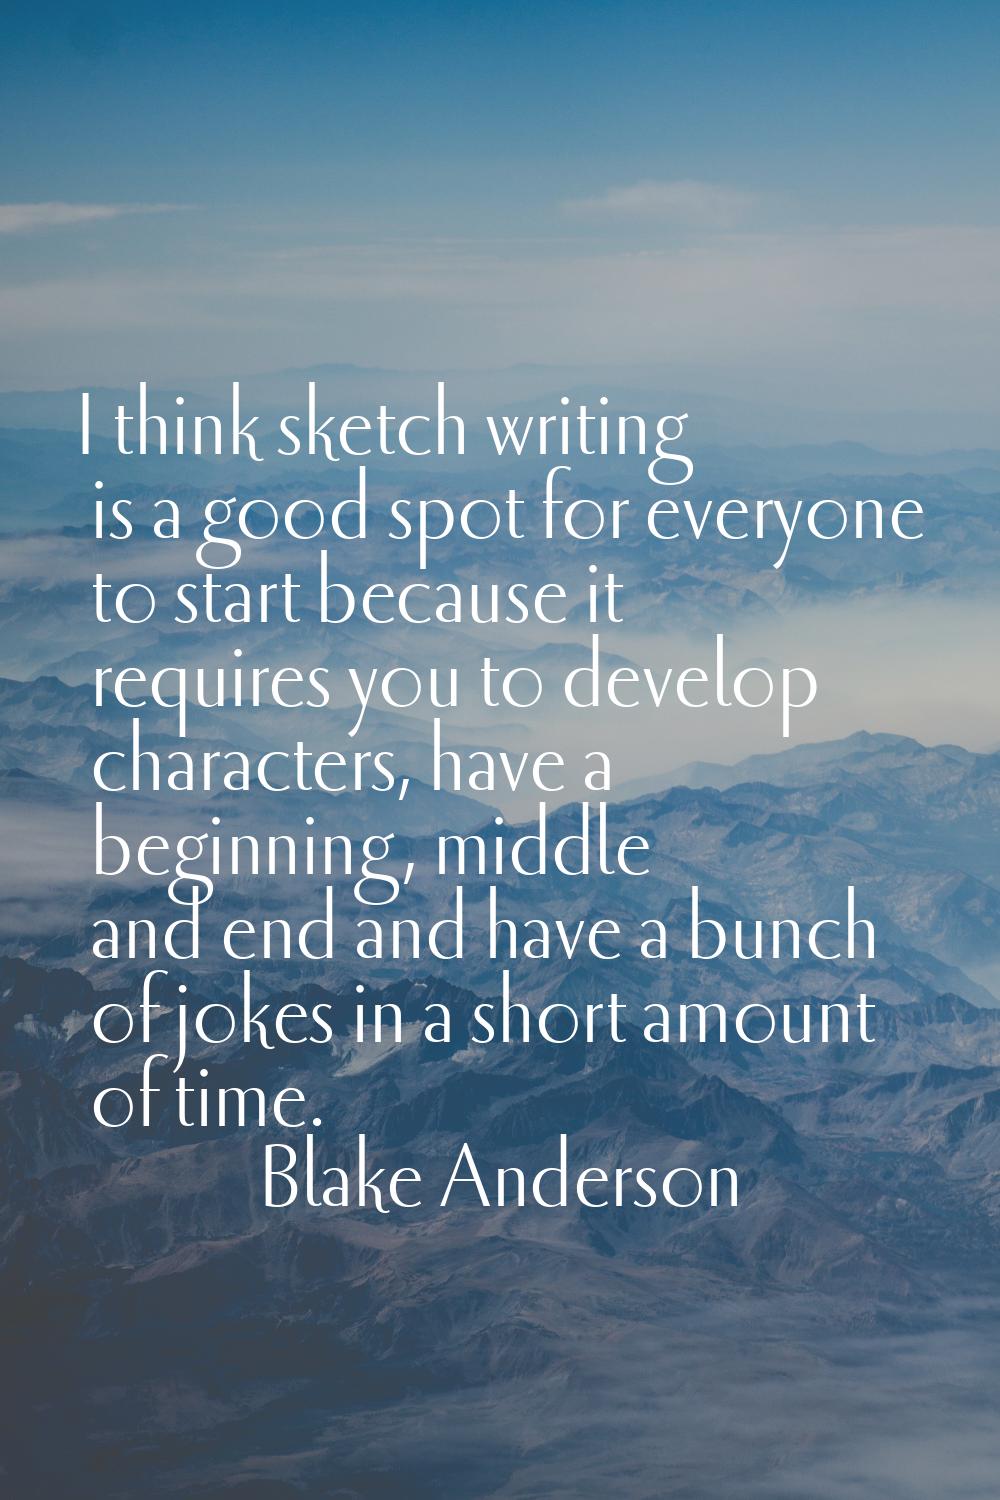 I think sketch writing is a good spot for everyone to start because it requires you to develop char